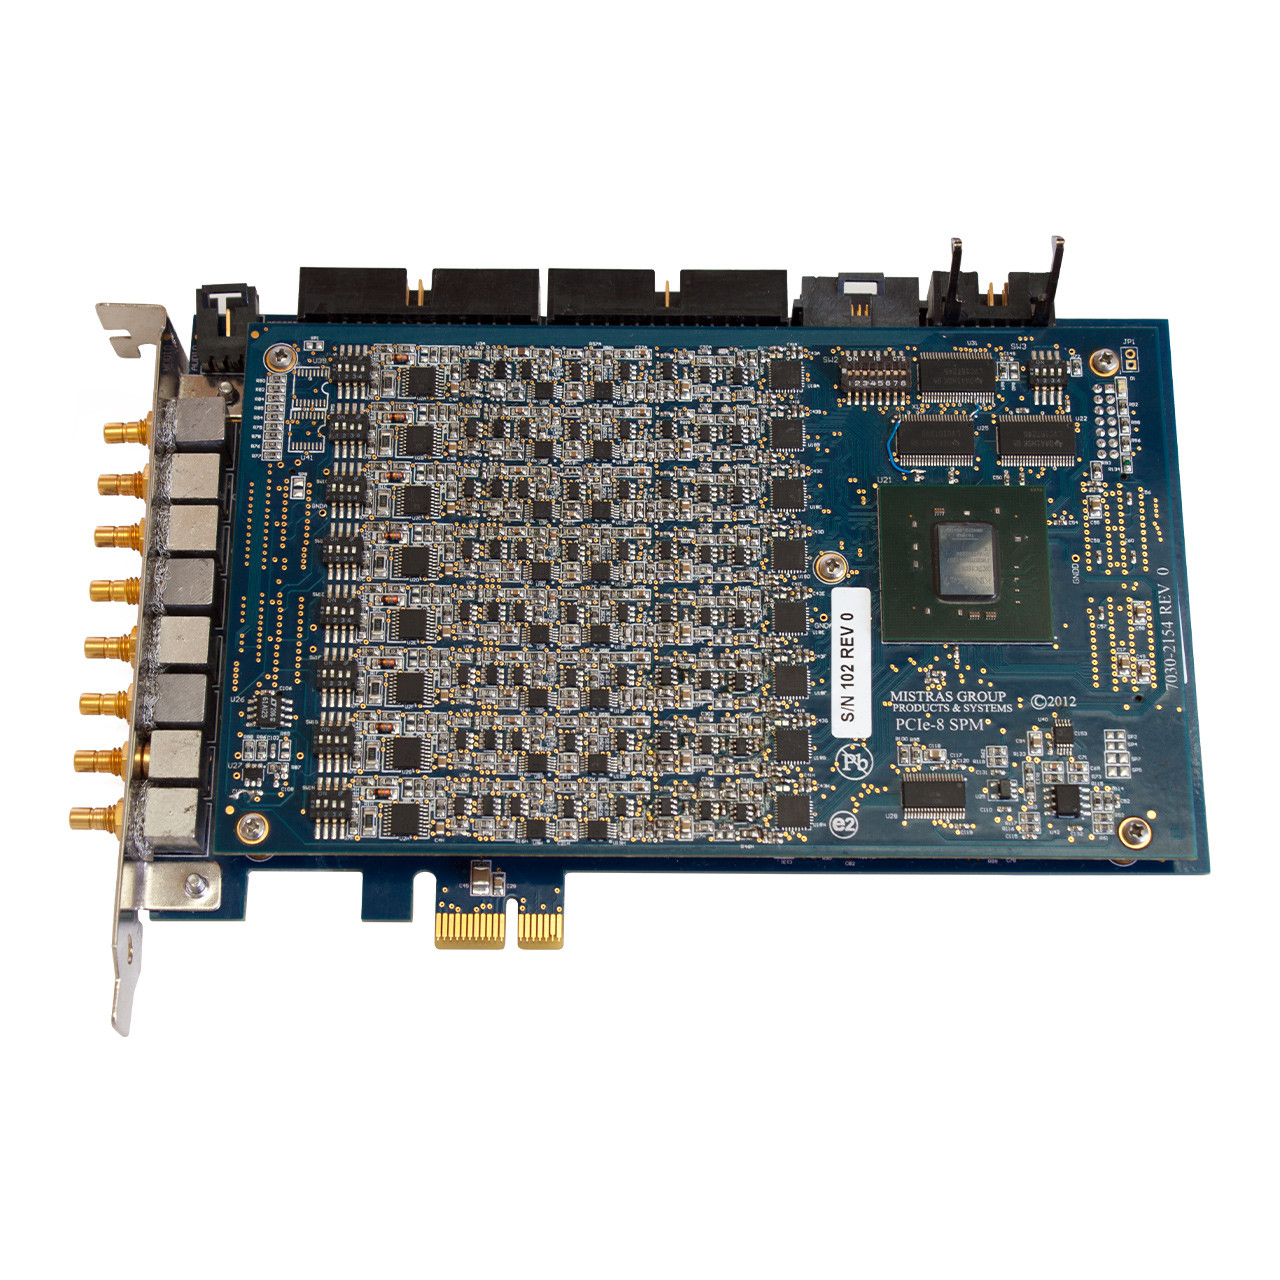 Express-8 – PCI Express-Based Eight-Channel AE Board & System, by